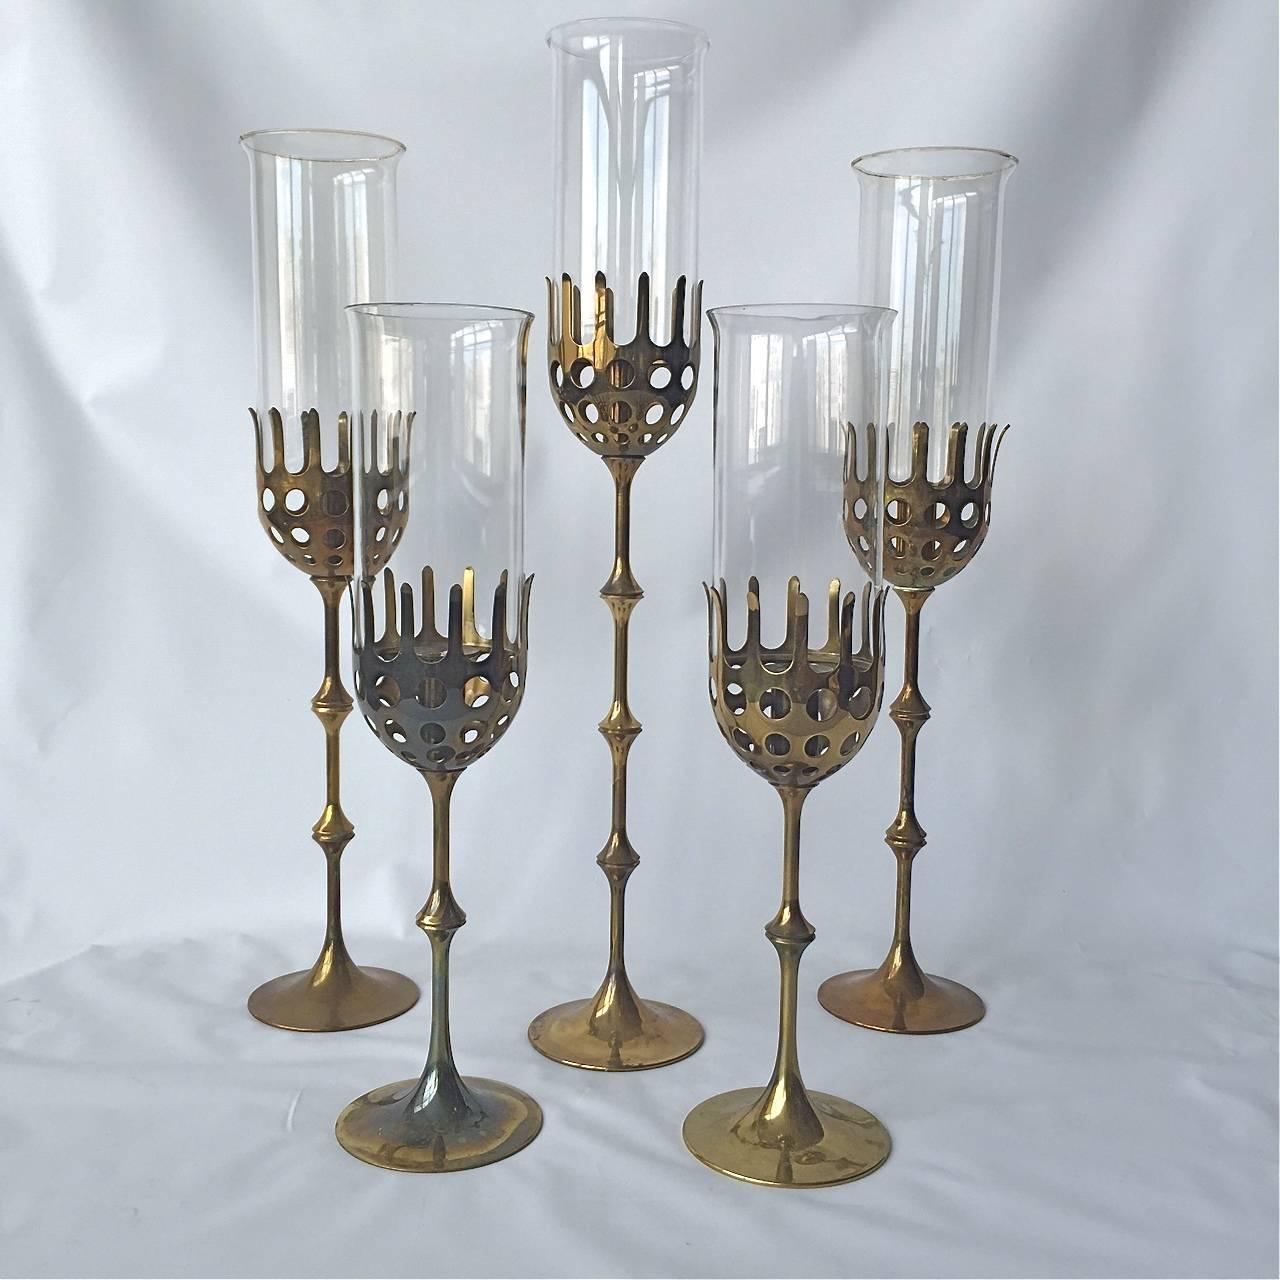 Set of 5 Hurricanes by Bjorn Winblad. 1918-2006, Denmark.
 Polished brass and glass.
 Height adjustable with interchangeable links. Diam. 4 